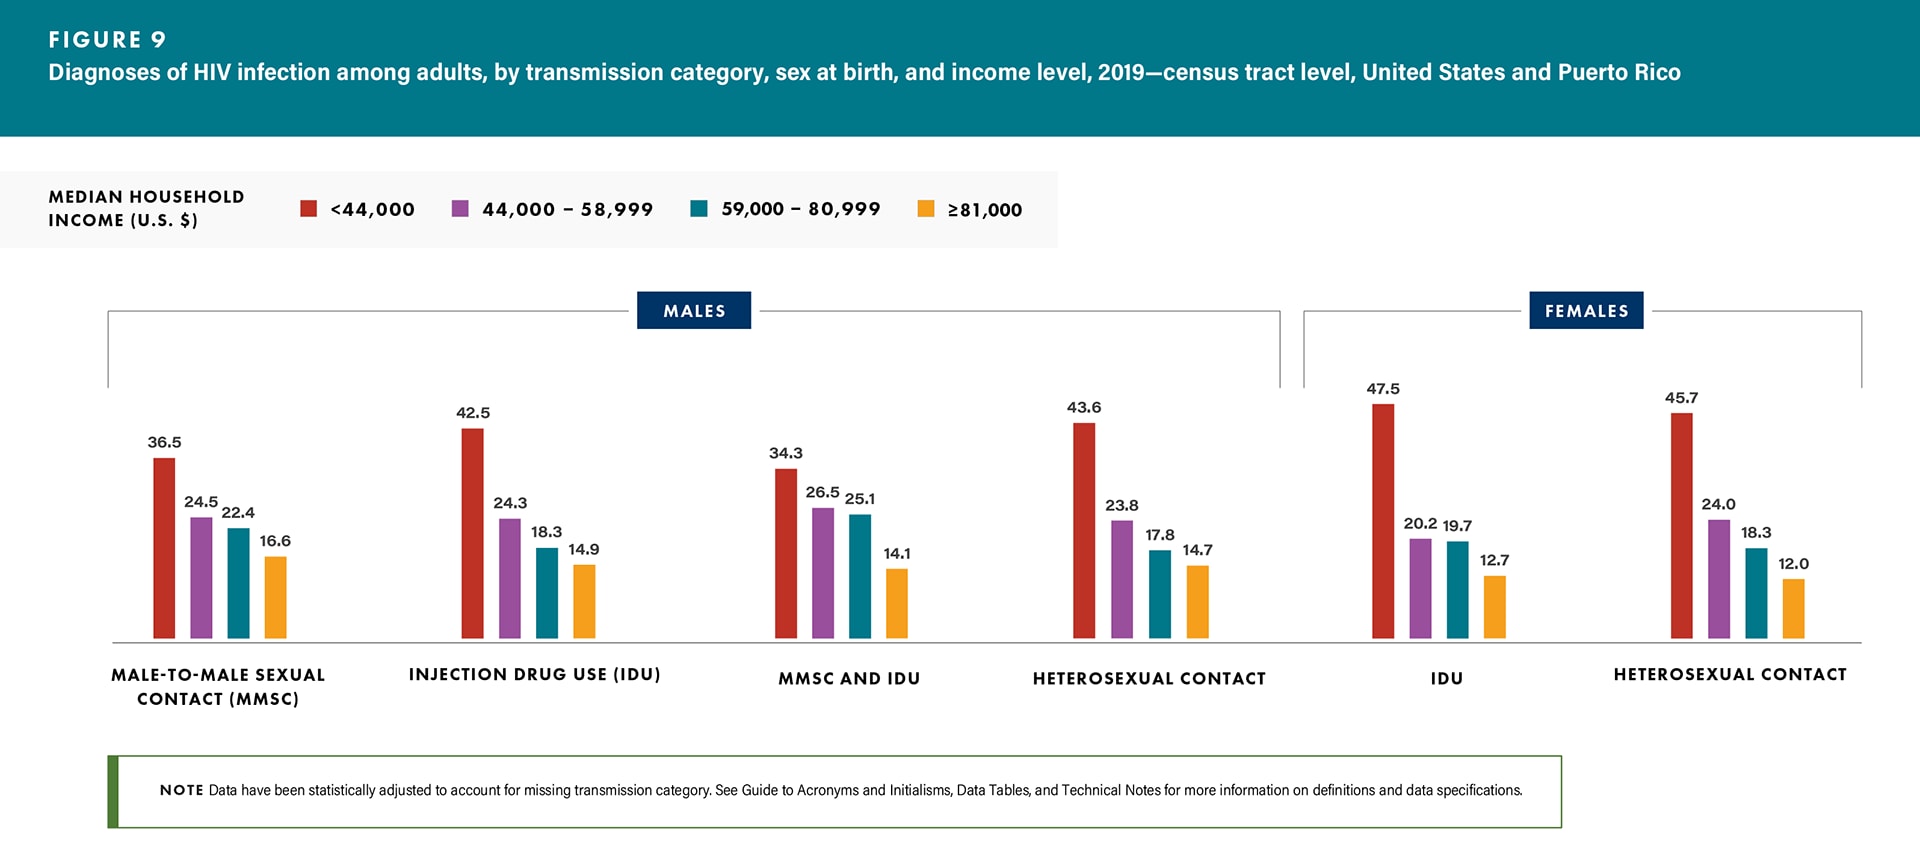 In 2019, adults who lived in census tracts with the lowest median household income (where the median household income was less than $44,000 a year) accounted for the highest HIV diagnosis rates for all transmission categories for both sexes.